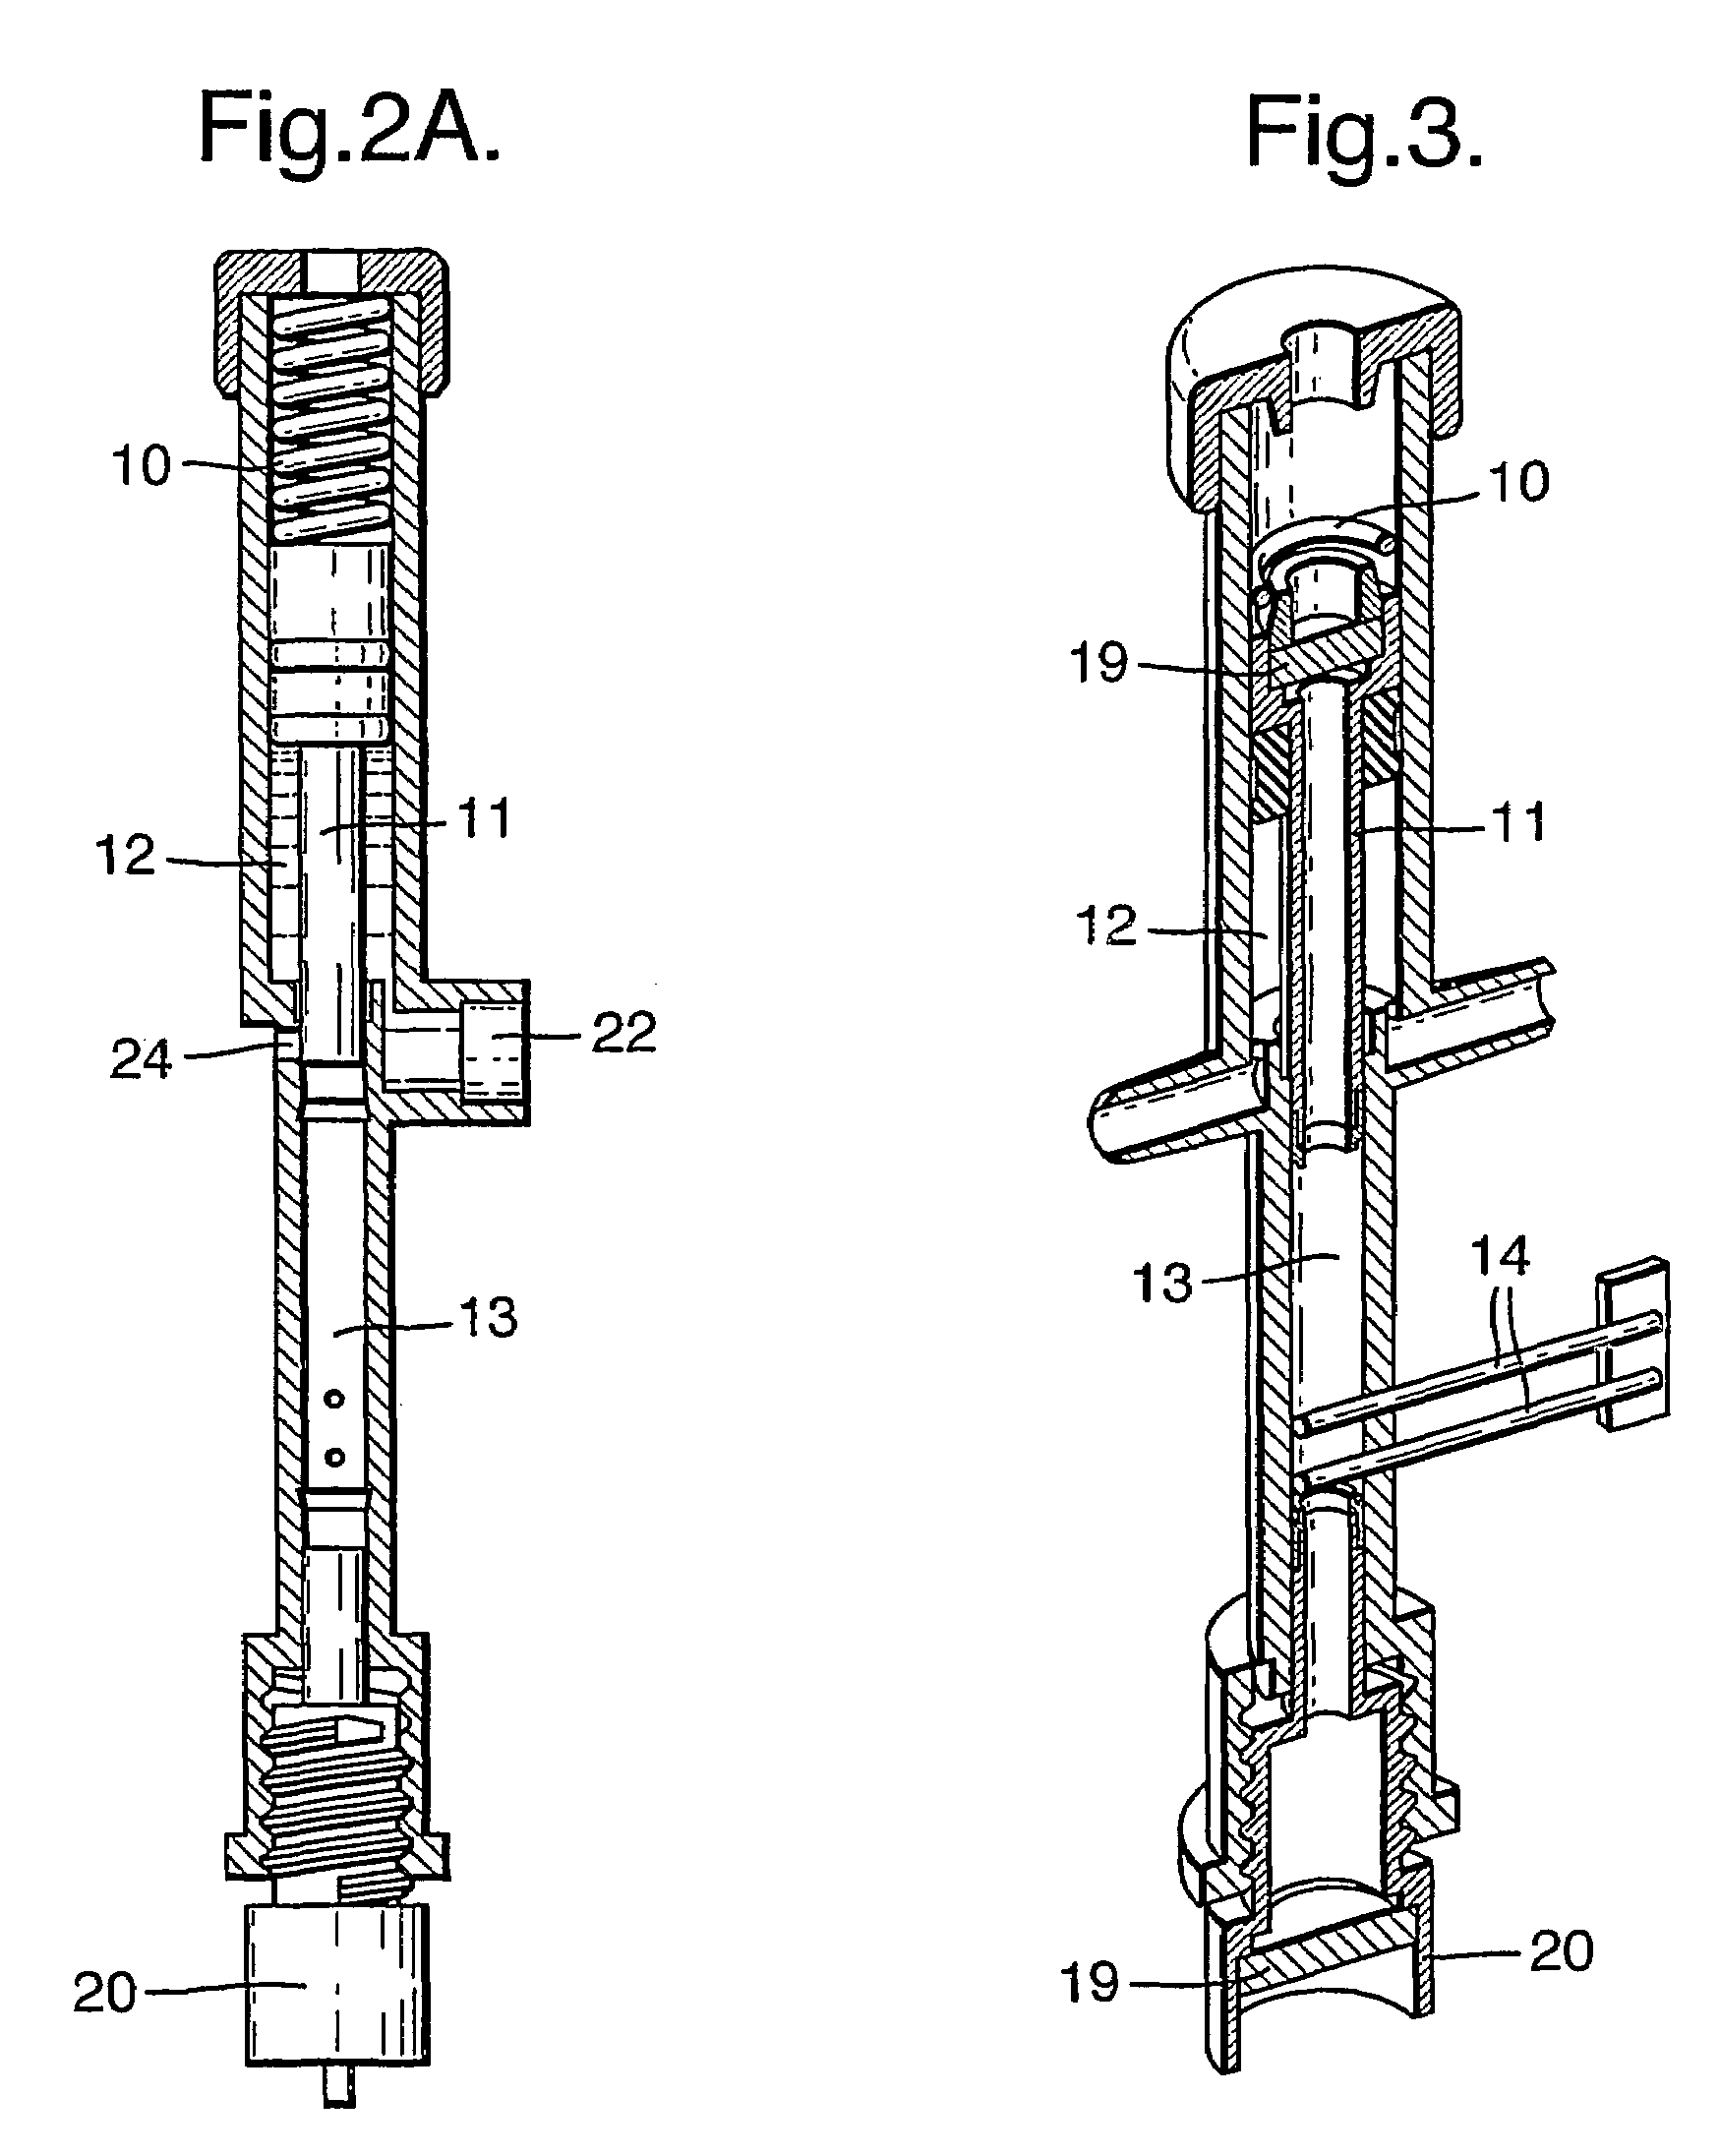 Drug infusion device